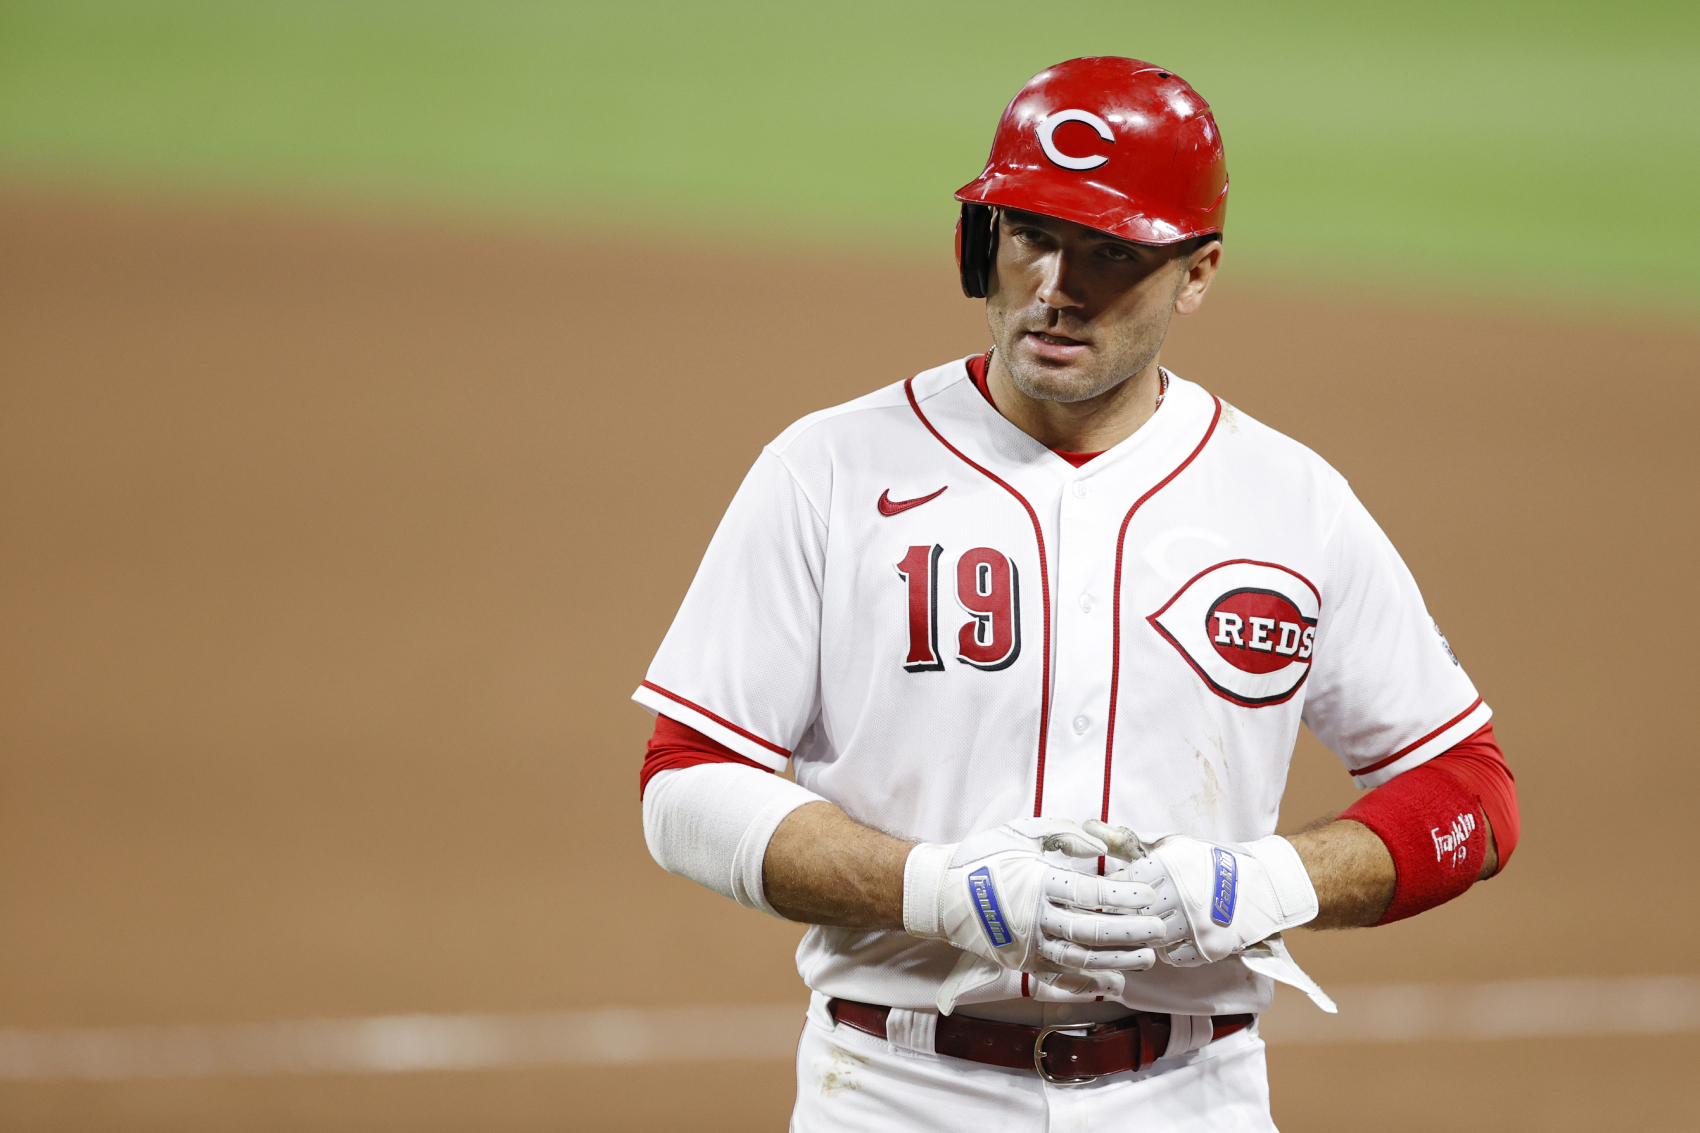 Joey Votto Just Sent a Stern Message To the Entire MLB, Called the Cincinnati Reds a ‘Nightmare’